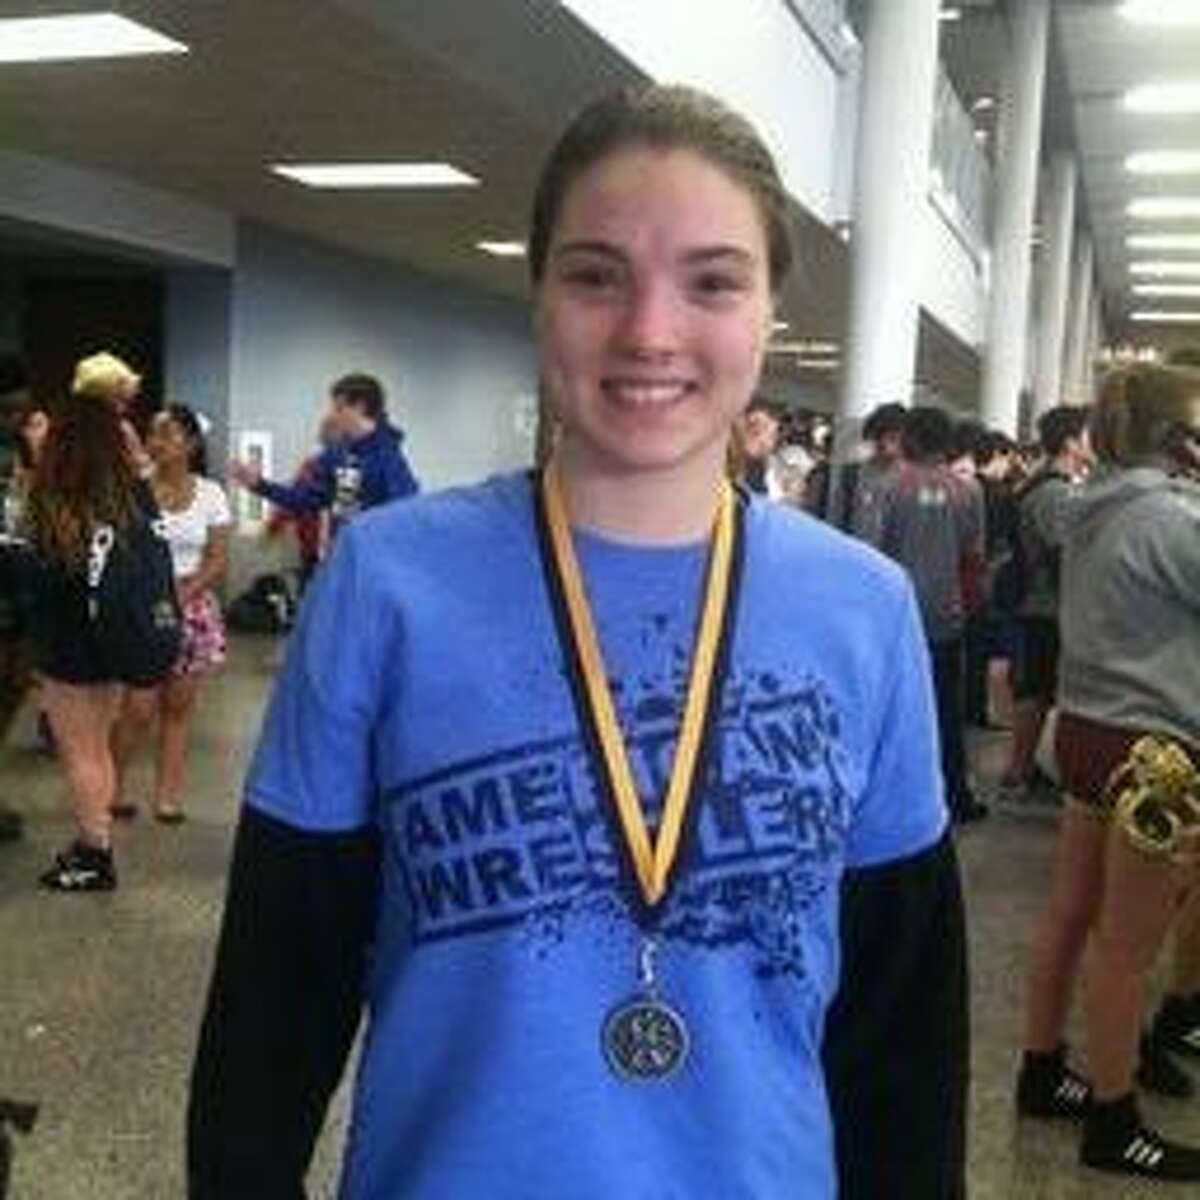 Texas USA Wresting is proud to announce the selection of Desiree Lynn Linton of Kingwood, Texas to the 2014 Team Texas National Women’s Wrestling Team.